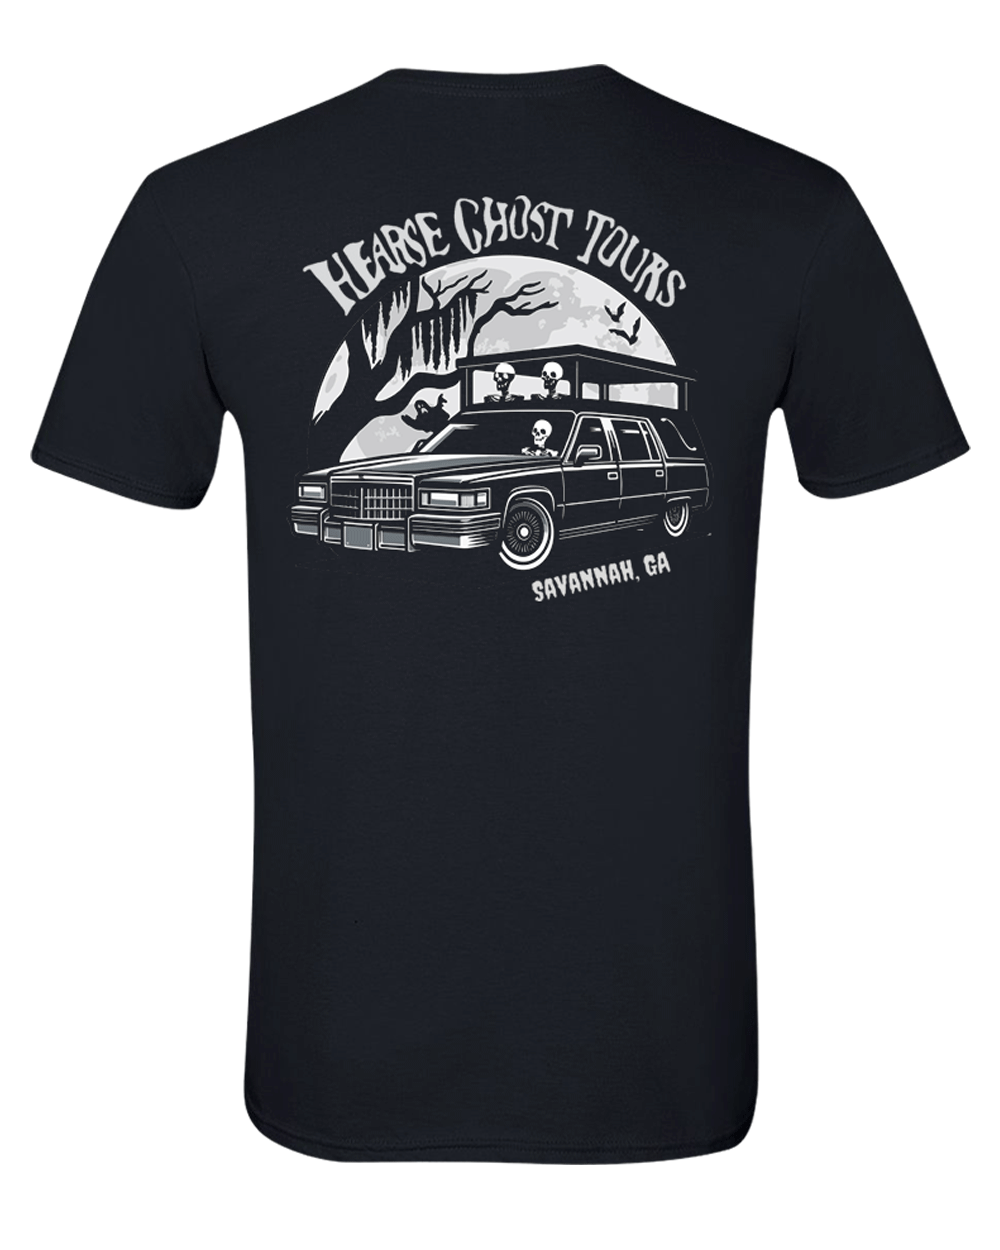 Hearse Ghost Tour “Double Sided” Unisex T-Shirt